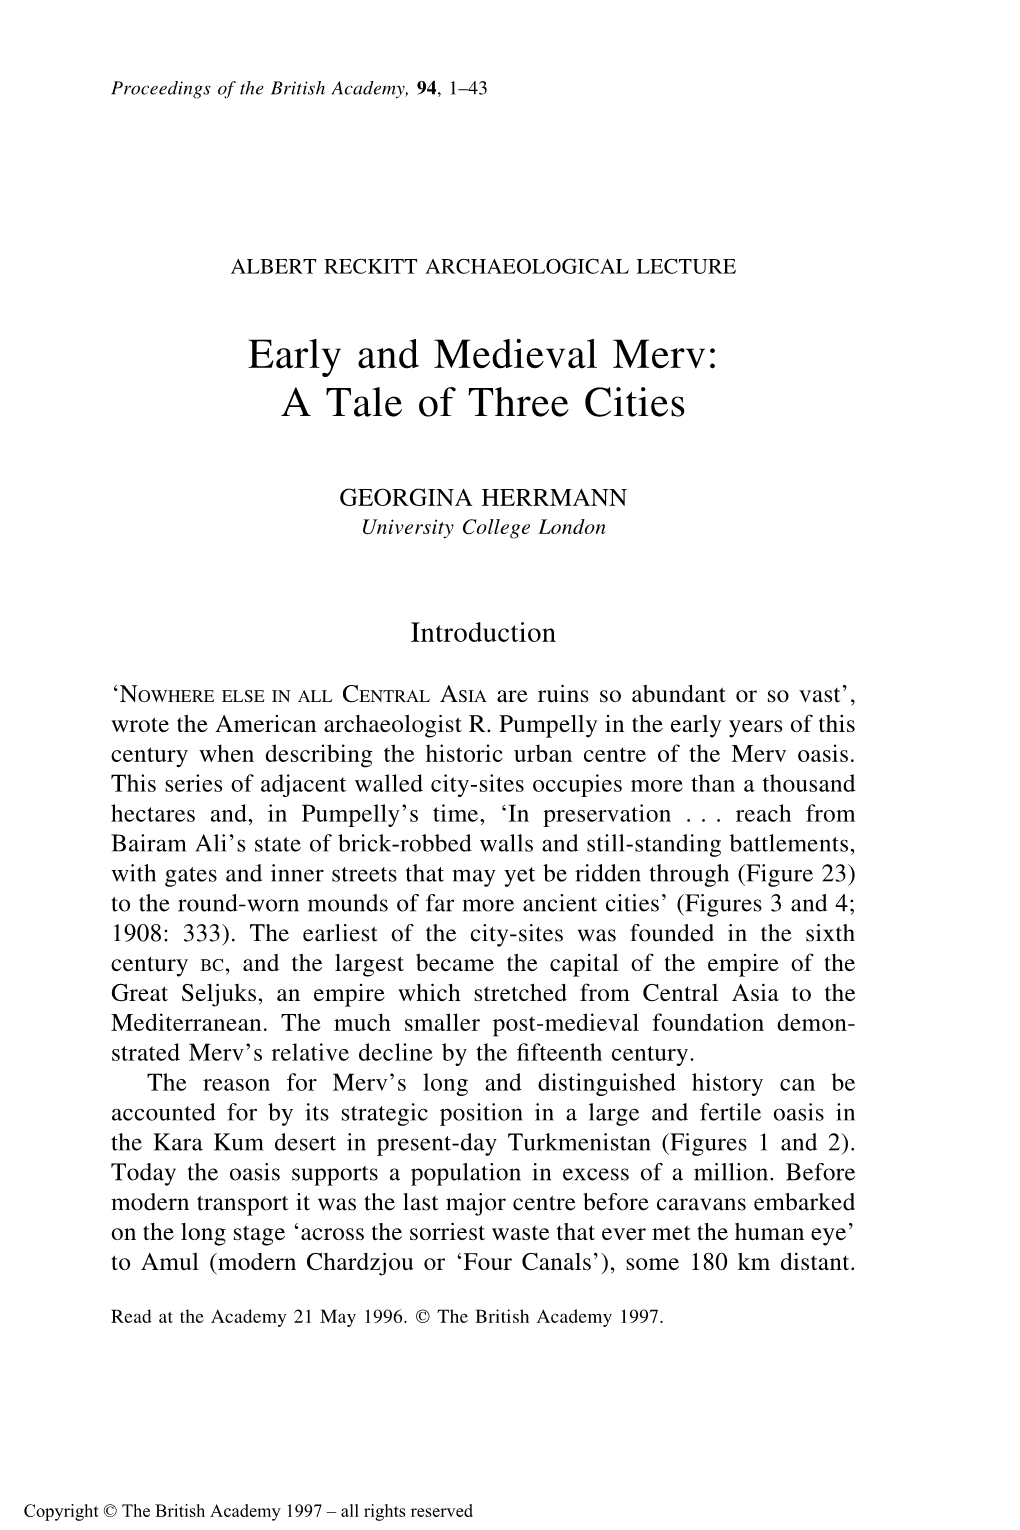 Early and Medieval Merv: a Tale of Three Cities